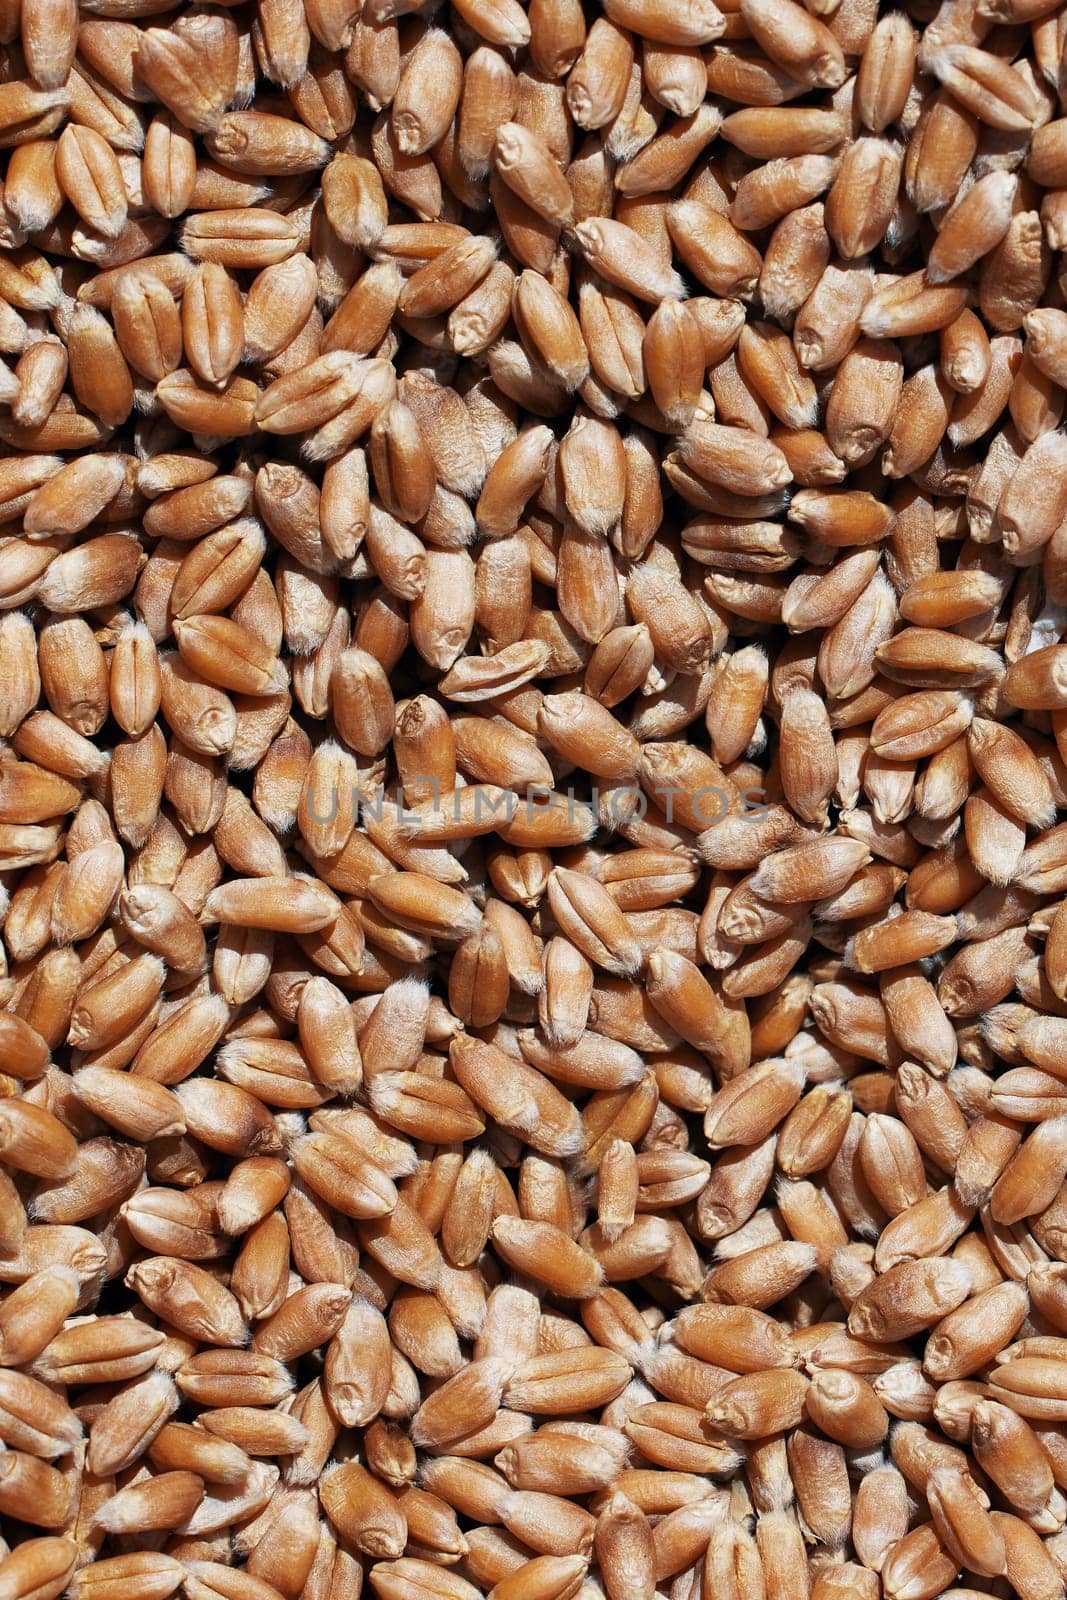 Wheat grains close-up view. Wheat grains background. Dry ripe wheat grains. Preparation for Agricultural season. Preparation of seeds for sowing. Agricultural background by EvgeniyQW